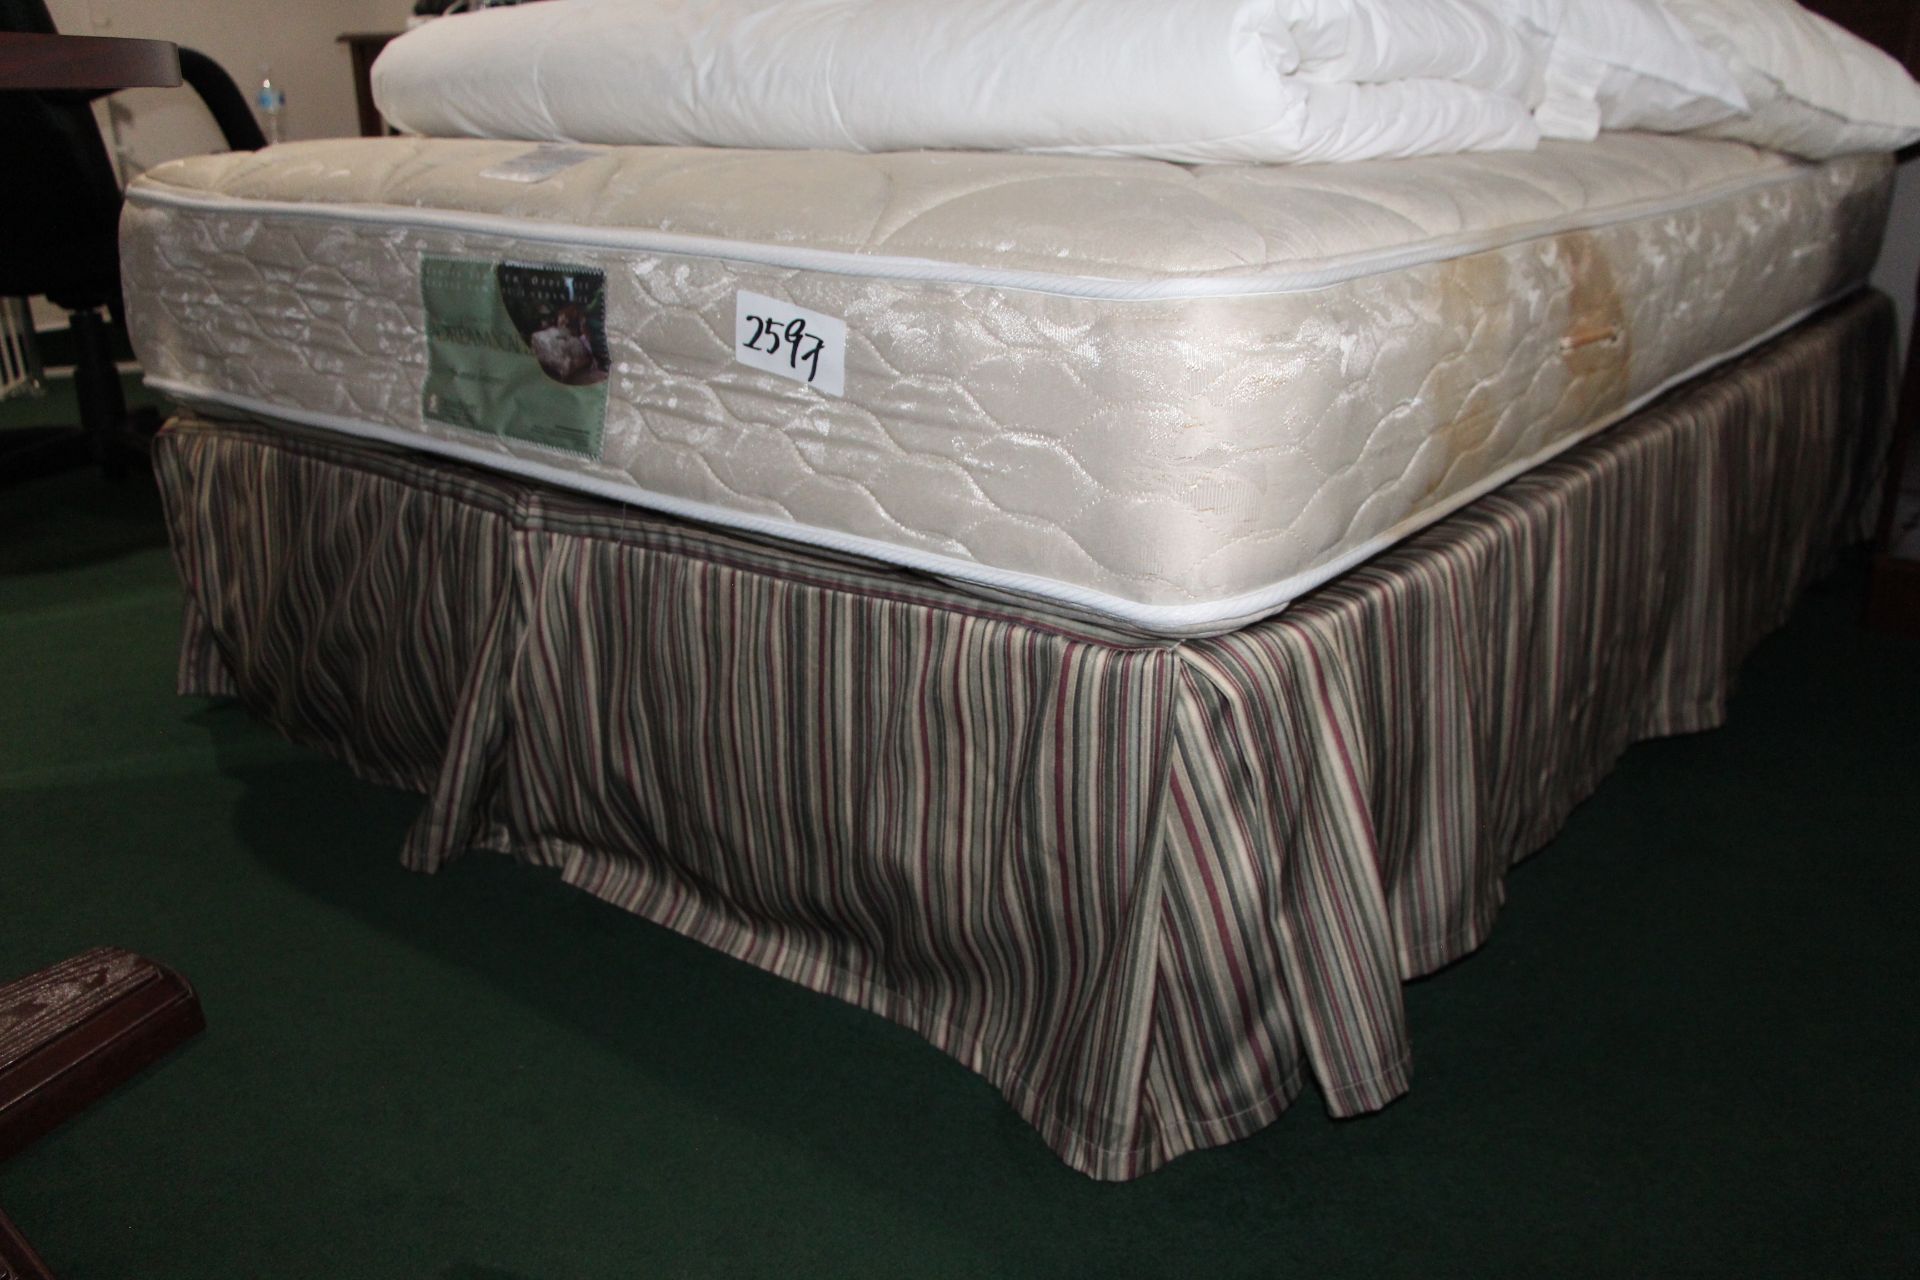 Double size mattress w/ box spring, bed skirt